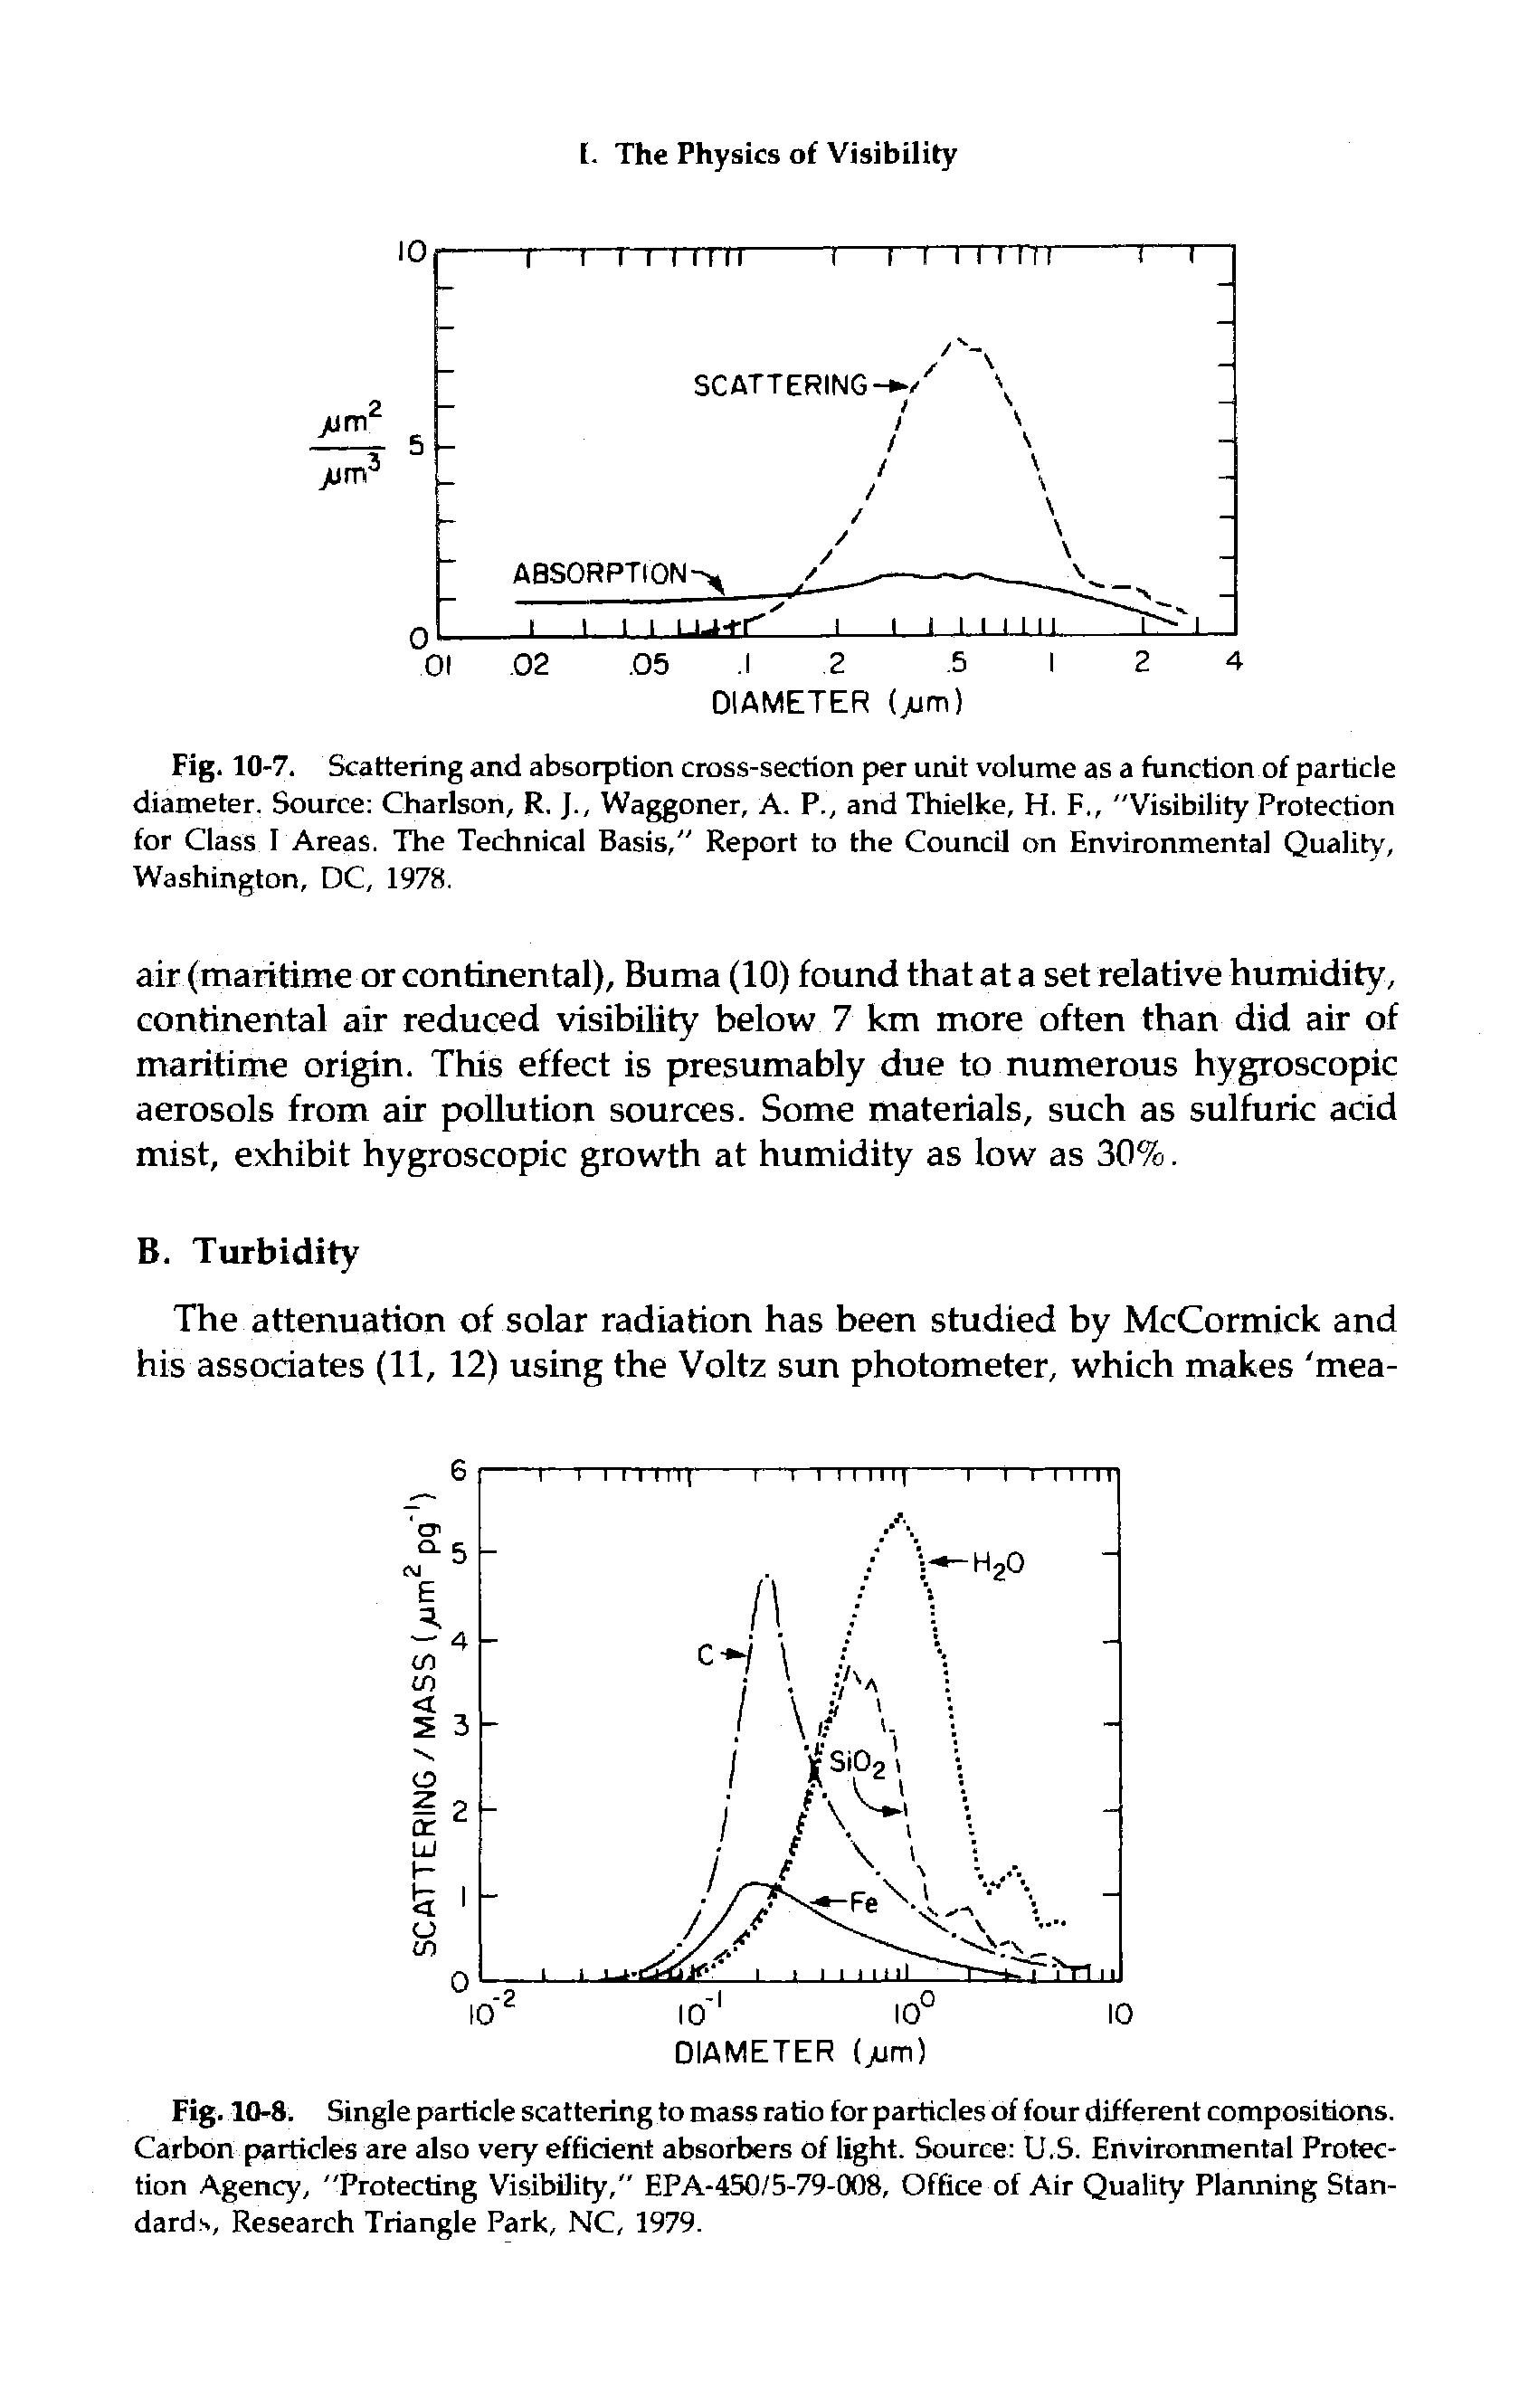 Fig. 10-7. Scattering and absorption cross-section per unit volume as a function of particle diameter. Source Charlson, R. J., Waggoner, A. P., and Thielke, H. F., "Visibility Protection for Class I Areas. The Technical Basis," Report to the Council on Environmental Quality, Washington, DC, 1978.